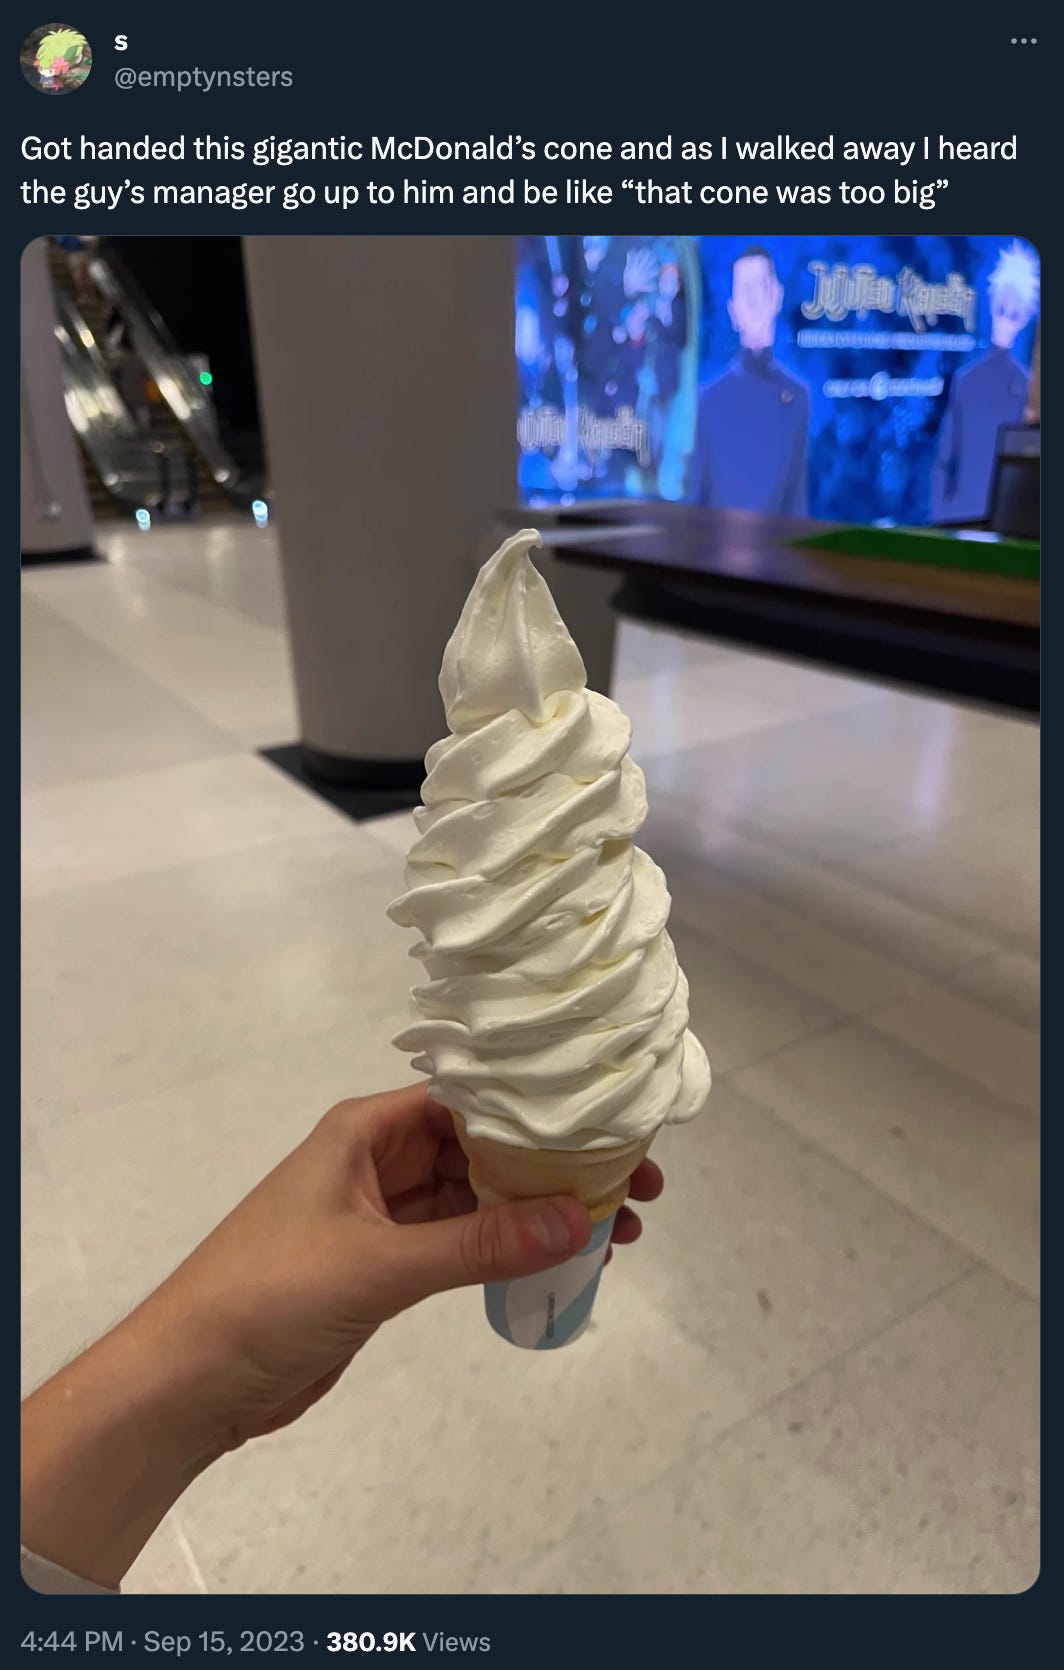 @emptynsters posted a picture of a hand holding a giant soft-serve ice cream cone, with the text: “Got handed this gigantic McDonald’s cone and as I walked away I heard the guy’s manager go up to him and be like ‘that cone was too big’.” Folks, the cone is too big. 